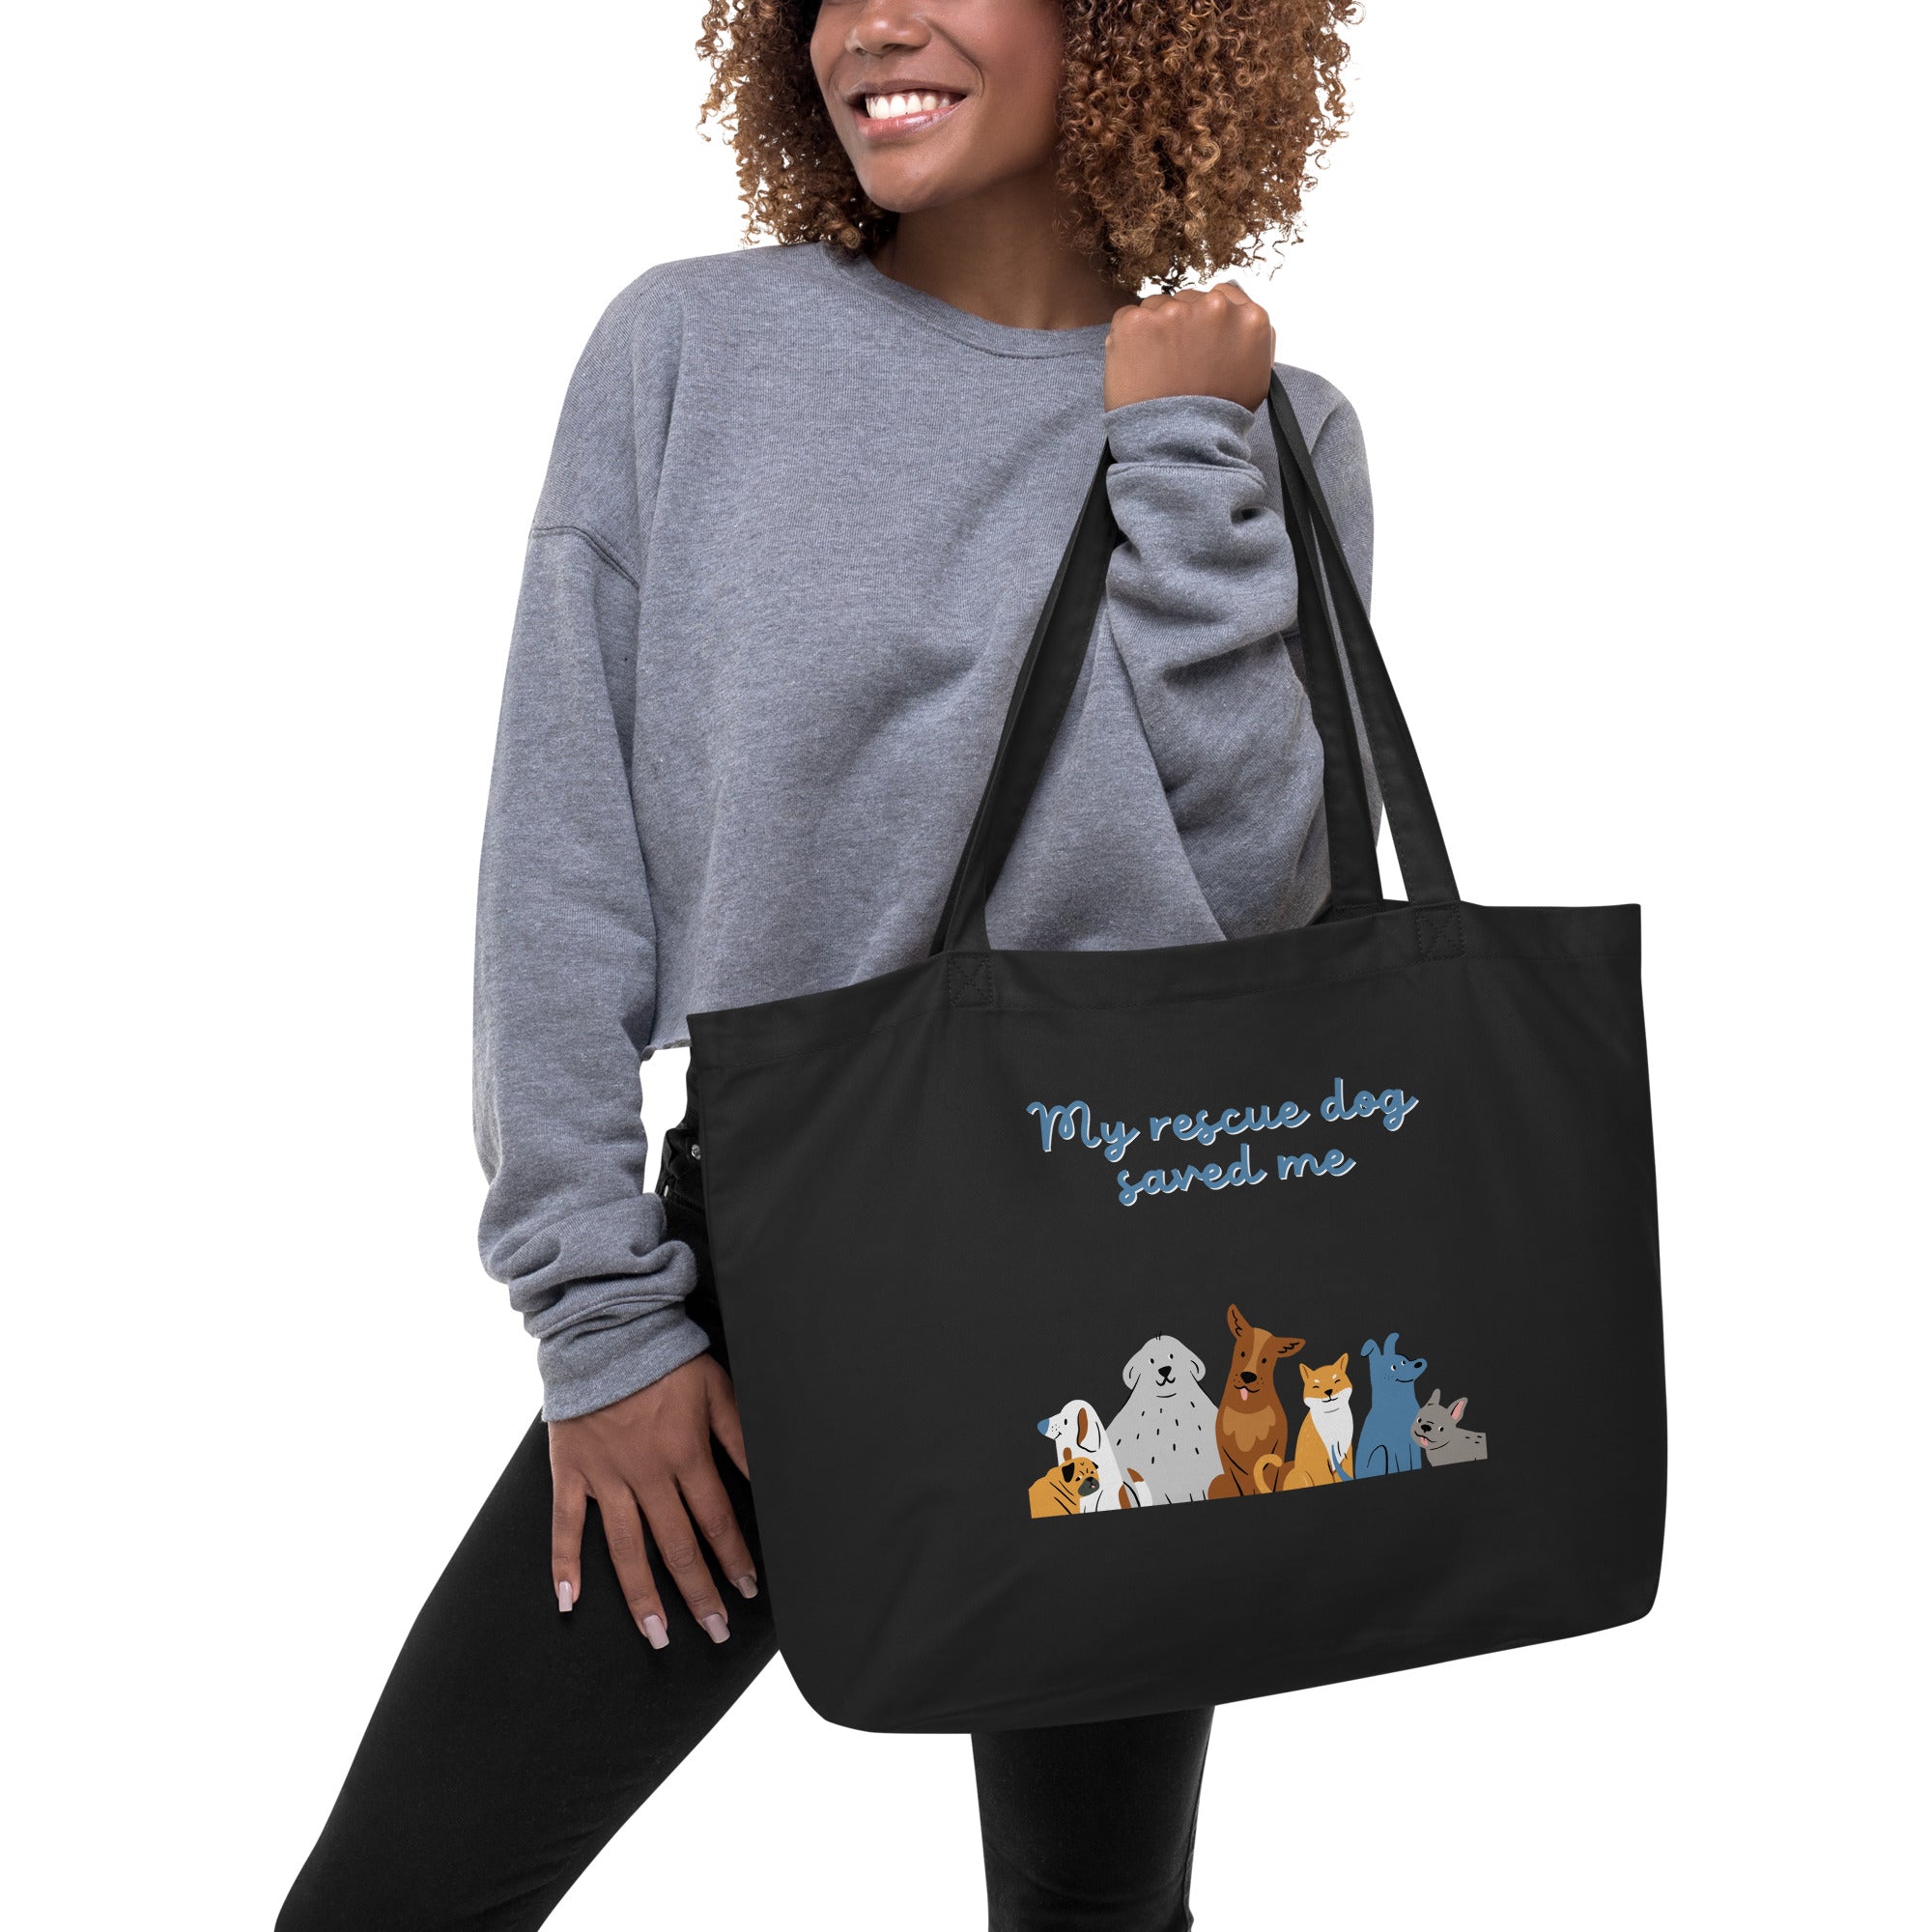 Rescue Dogs Large organic tote bag